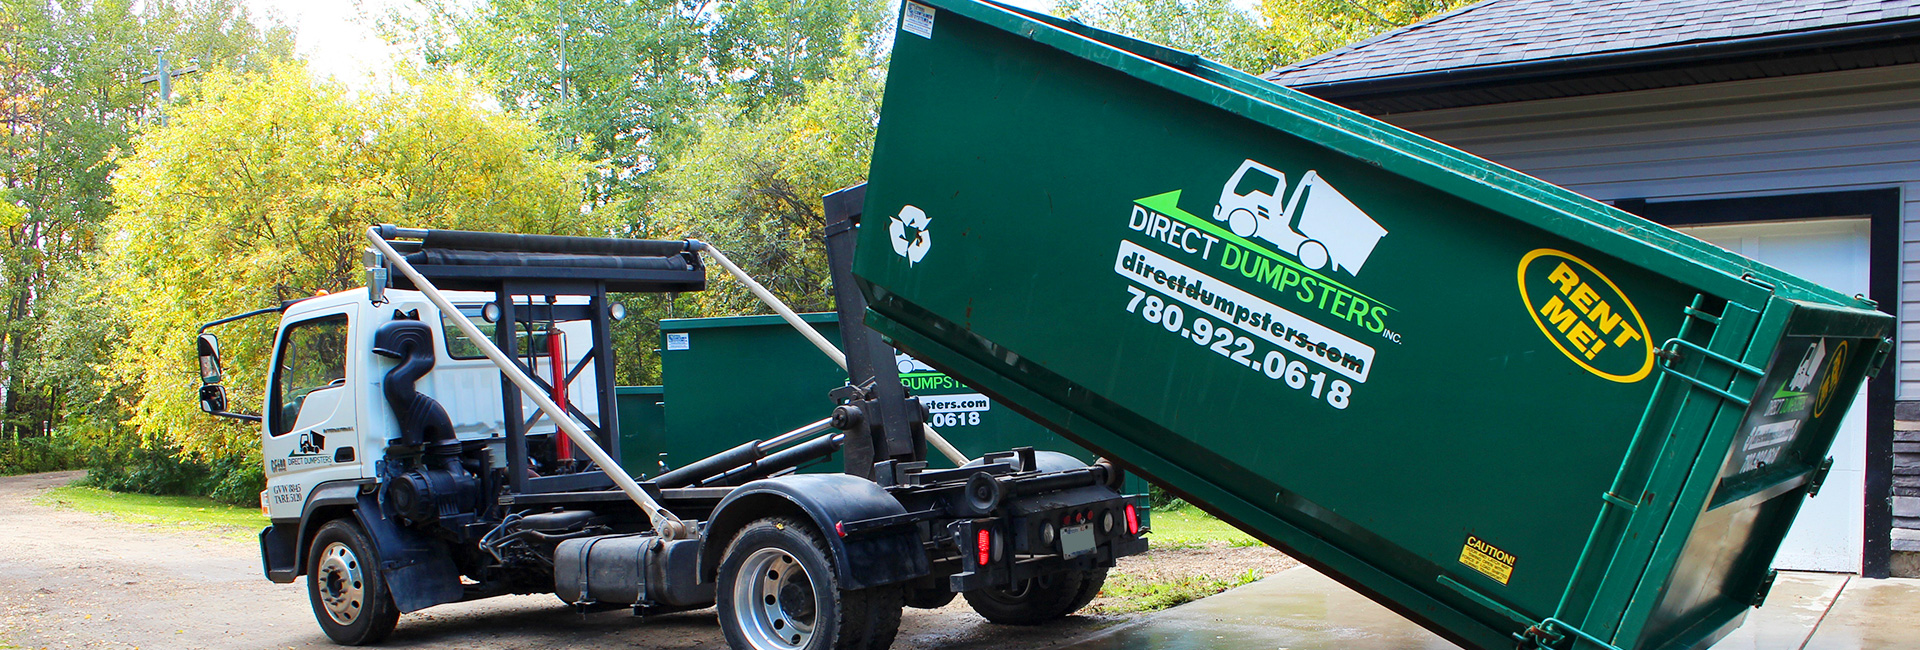 Direct Dumpsters offers different sizes of Garbage Bins